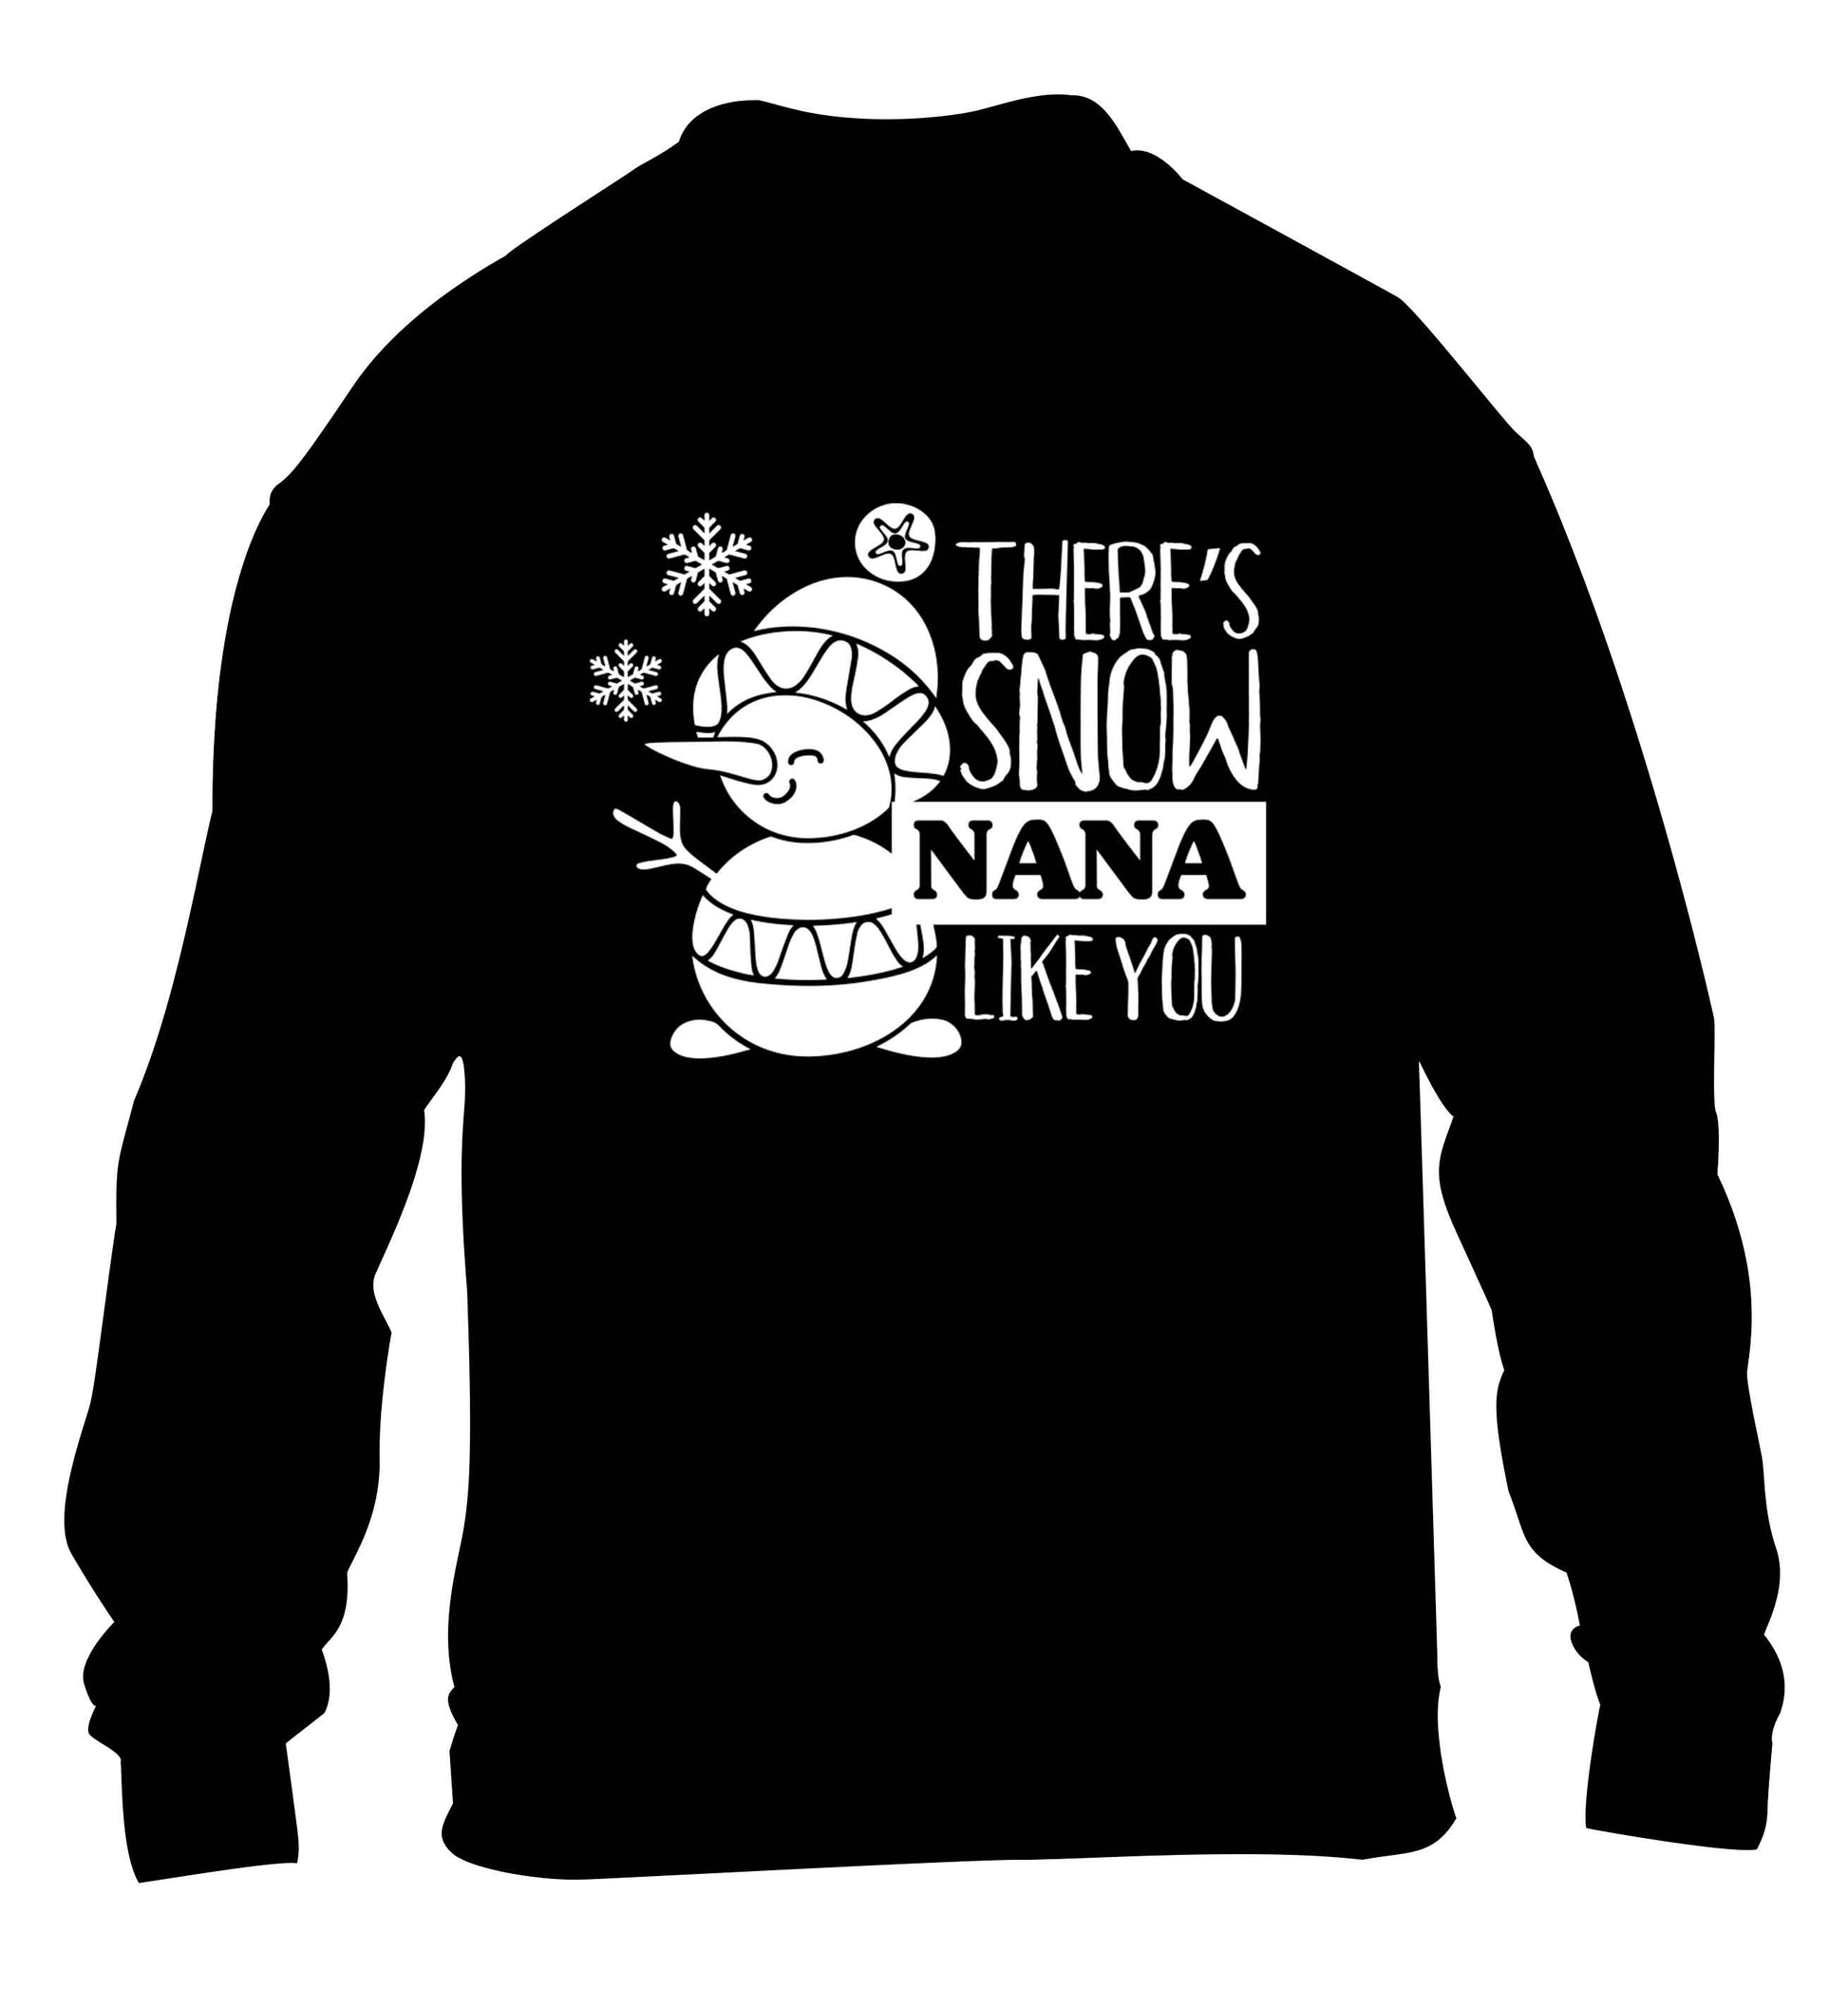 There's snow nana like you children's black sweater 12-13 Years